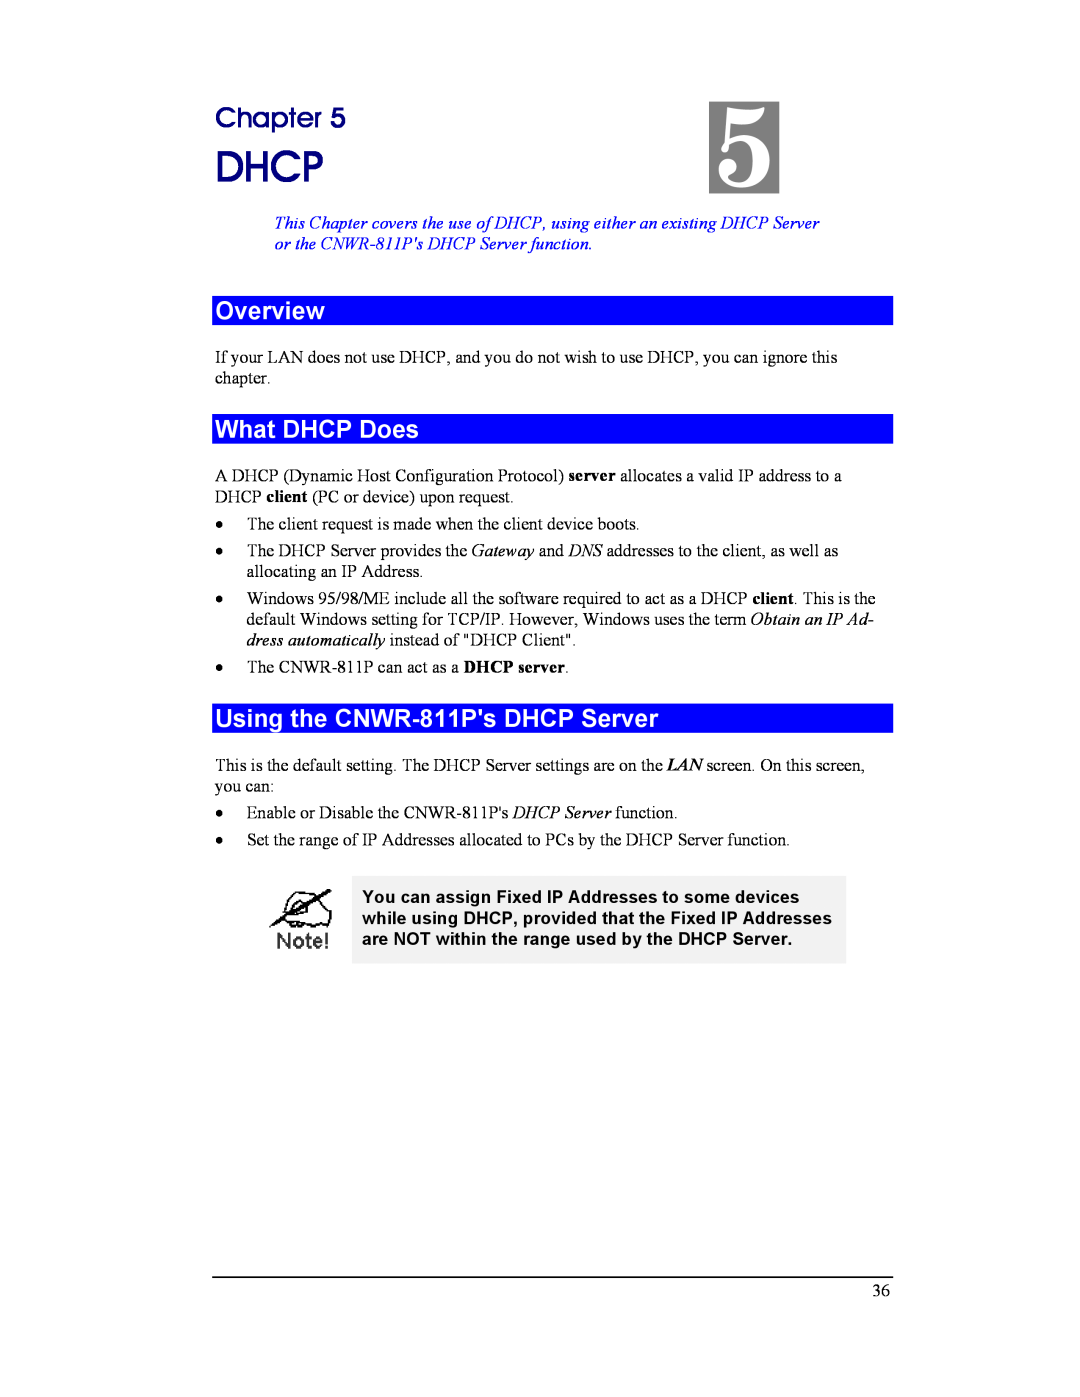 CNET manual Dhcp, What DHCP Does, Using the CNWR-811Ps DHCP Server, Chapter, Overview 